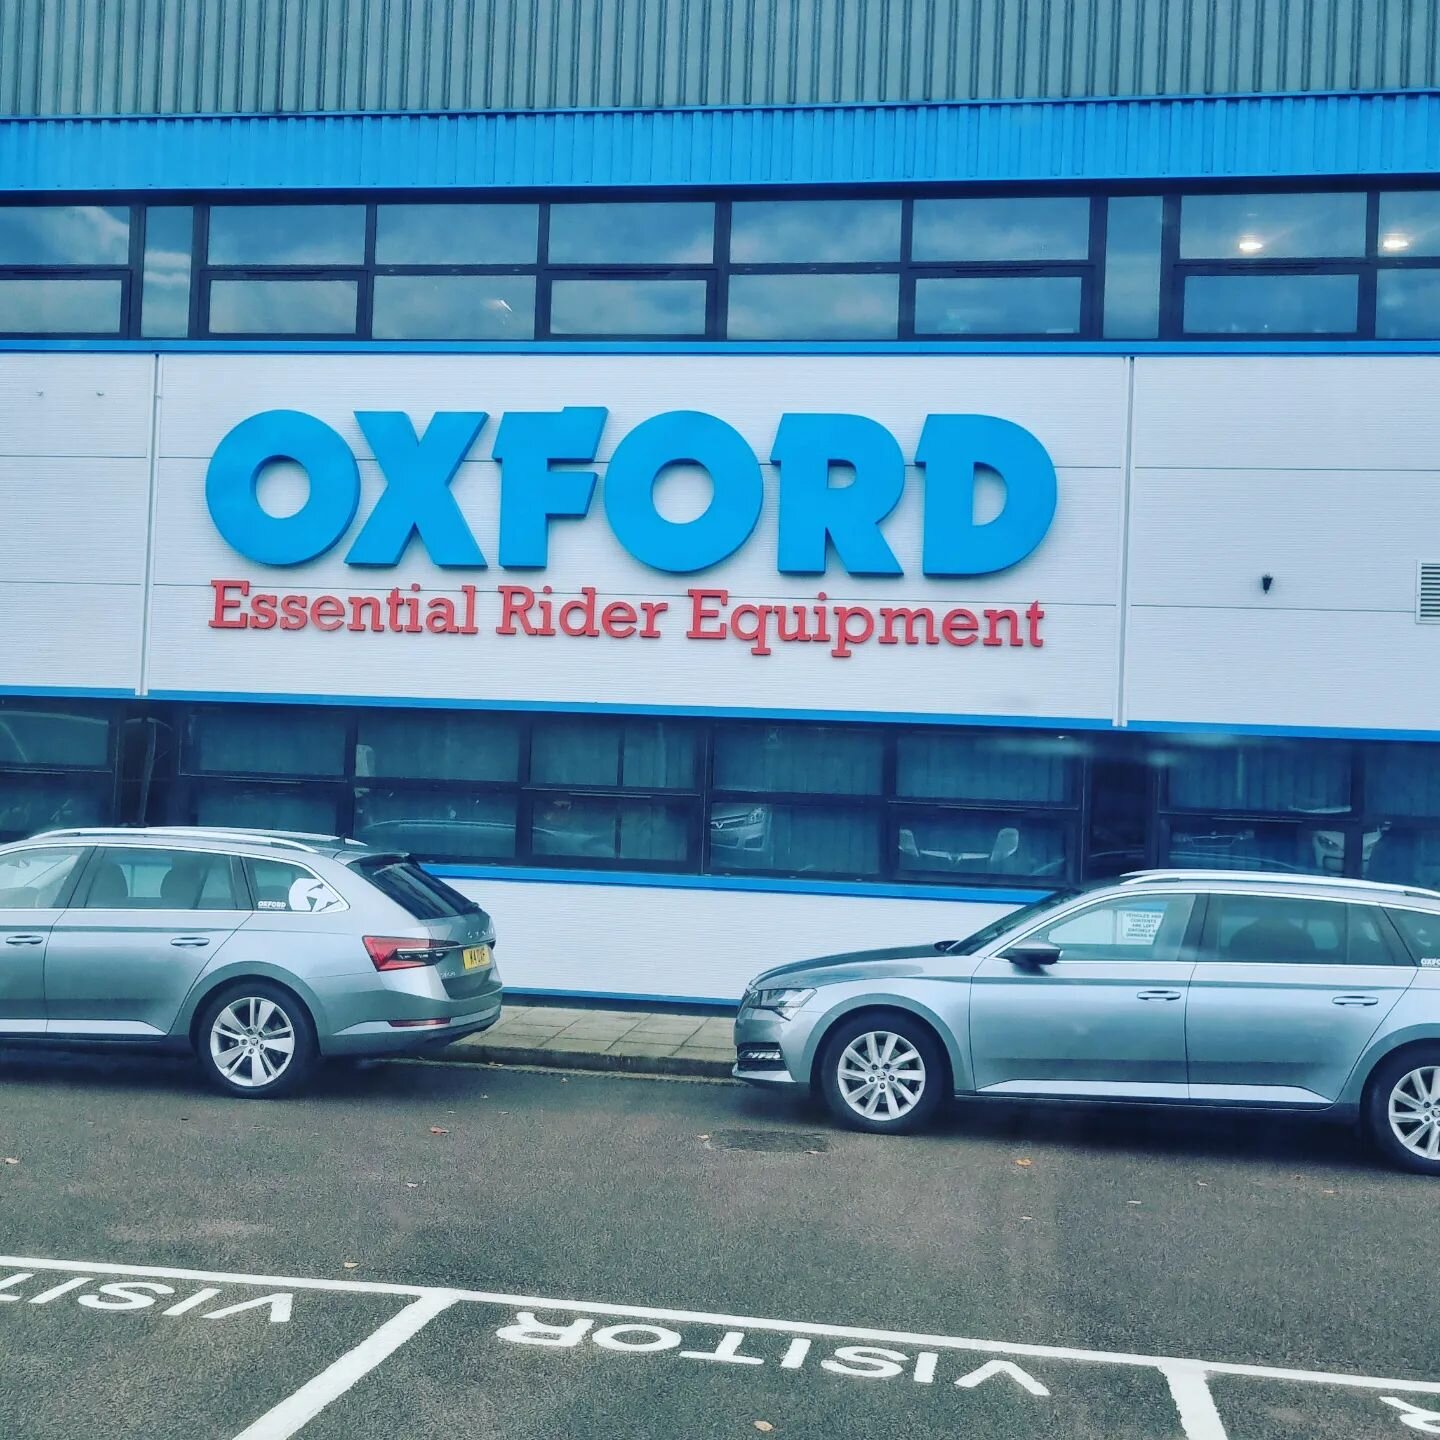 Today we are at the Oxford hq to have a butchers at next year's offerings 

#conquerorsapparel #oxford #motorcycleapparel #smallbusinessuk #smallbutpowerful #twowheelsadventure #motorcycle